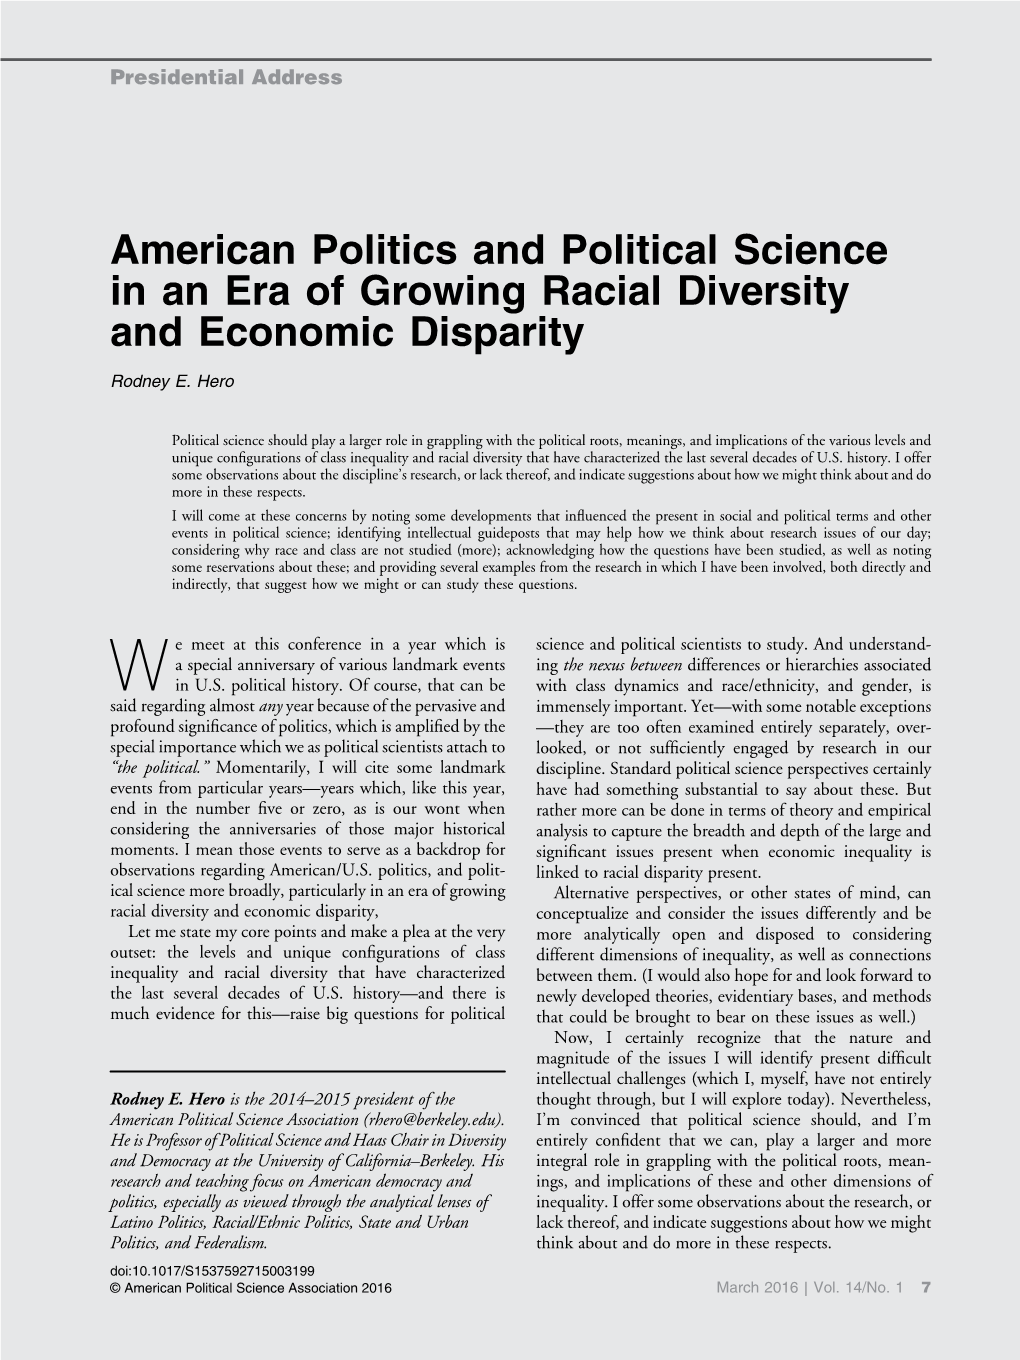 American Politics and Political Science in an Era of Growing Racial Diversity and Economic Disparity Rodney E